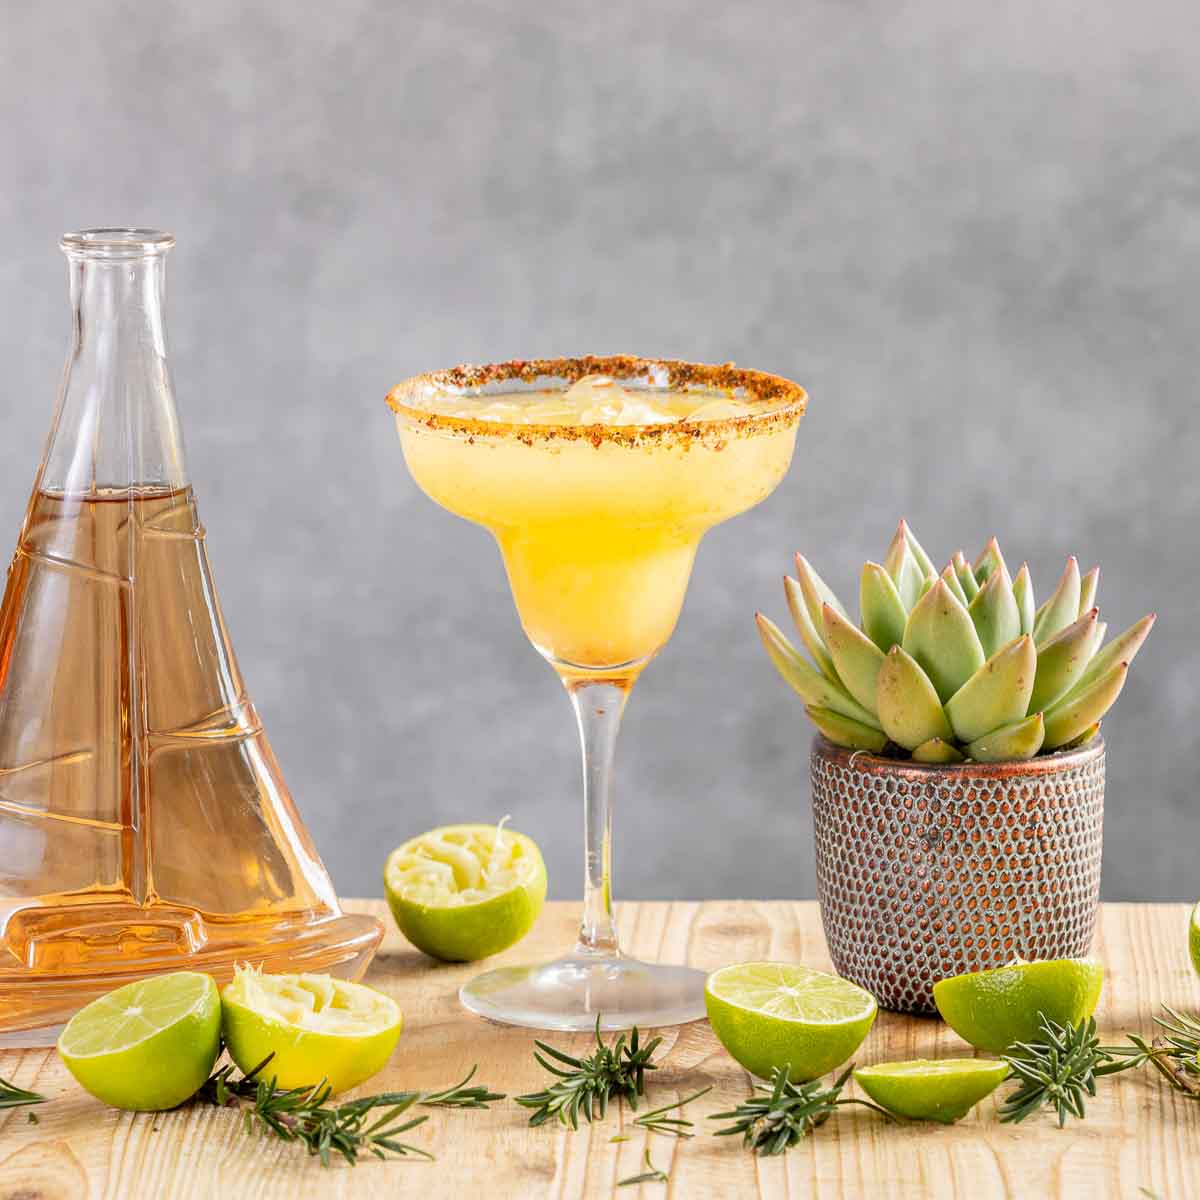 Sip Into Summer: 15 Refreshing Rum Cocktails You Need to Try